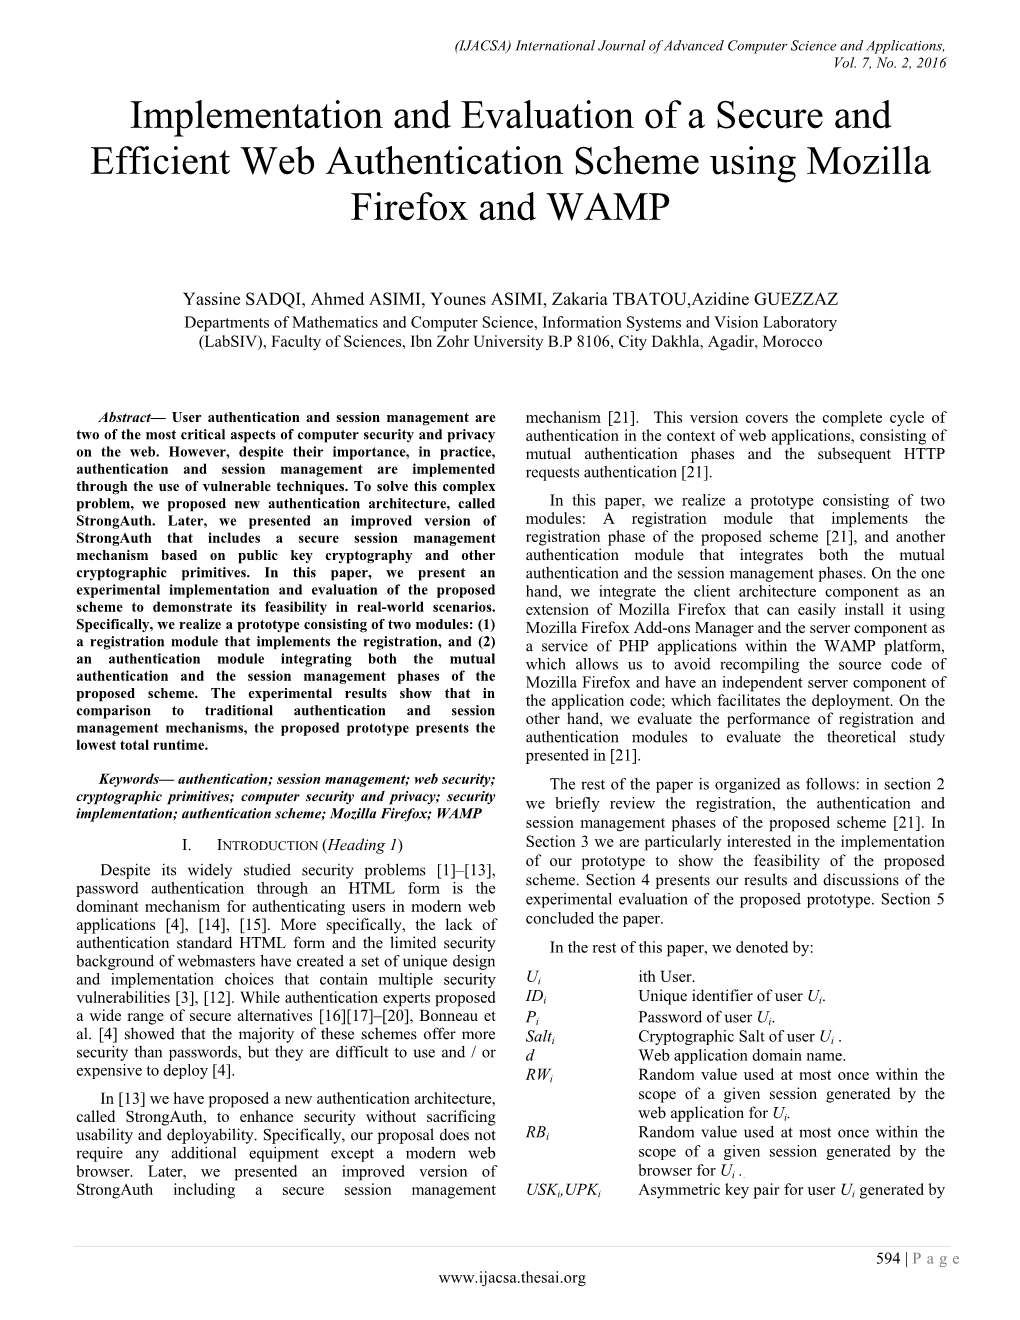 Implementation and Evaluation of a Secure and Efficient Web Authentication Scheme Using Mozilla Firefox and WAMP